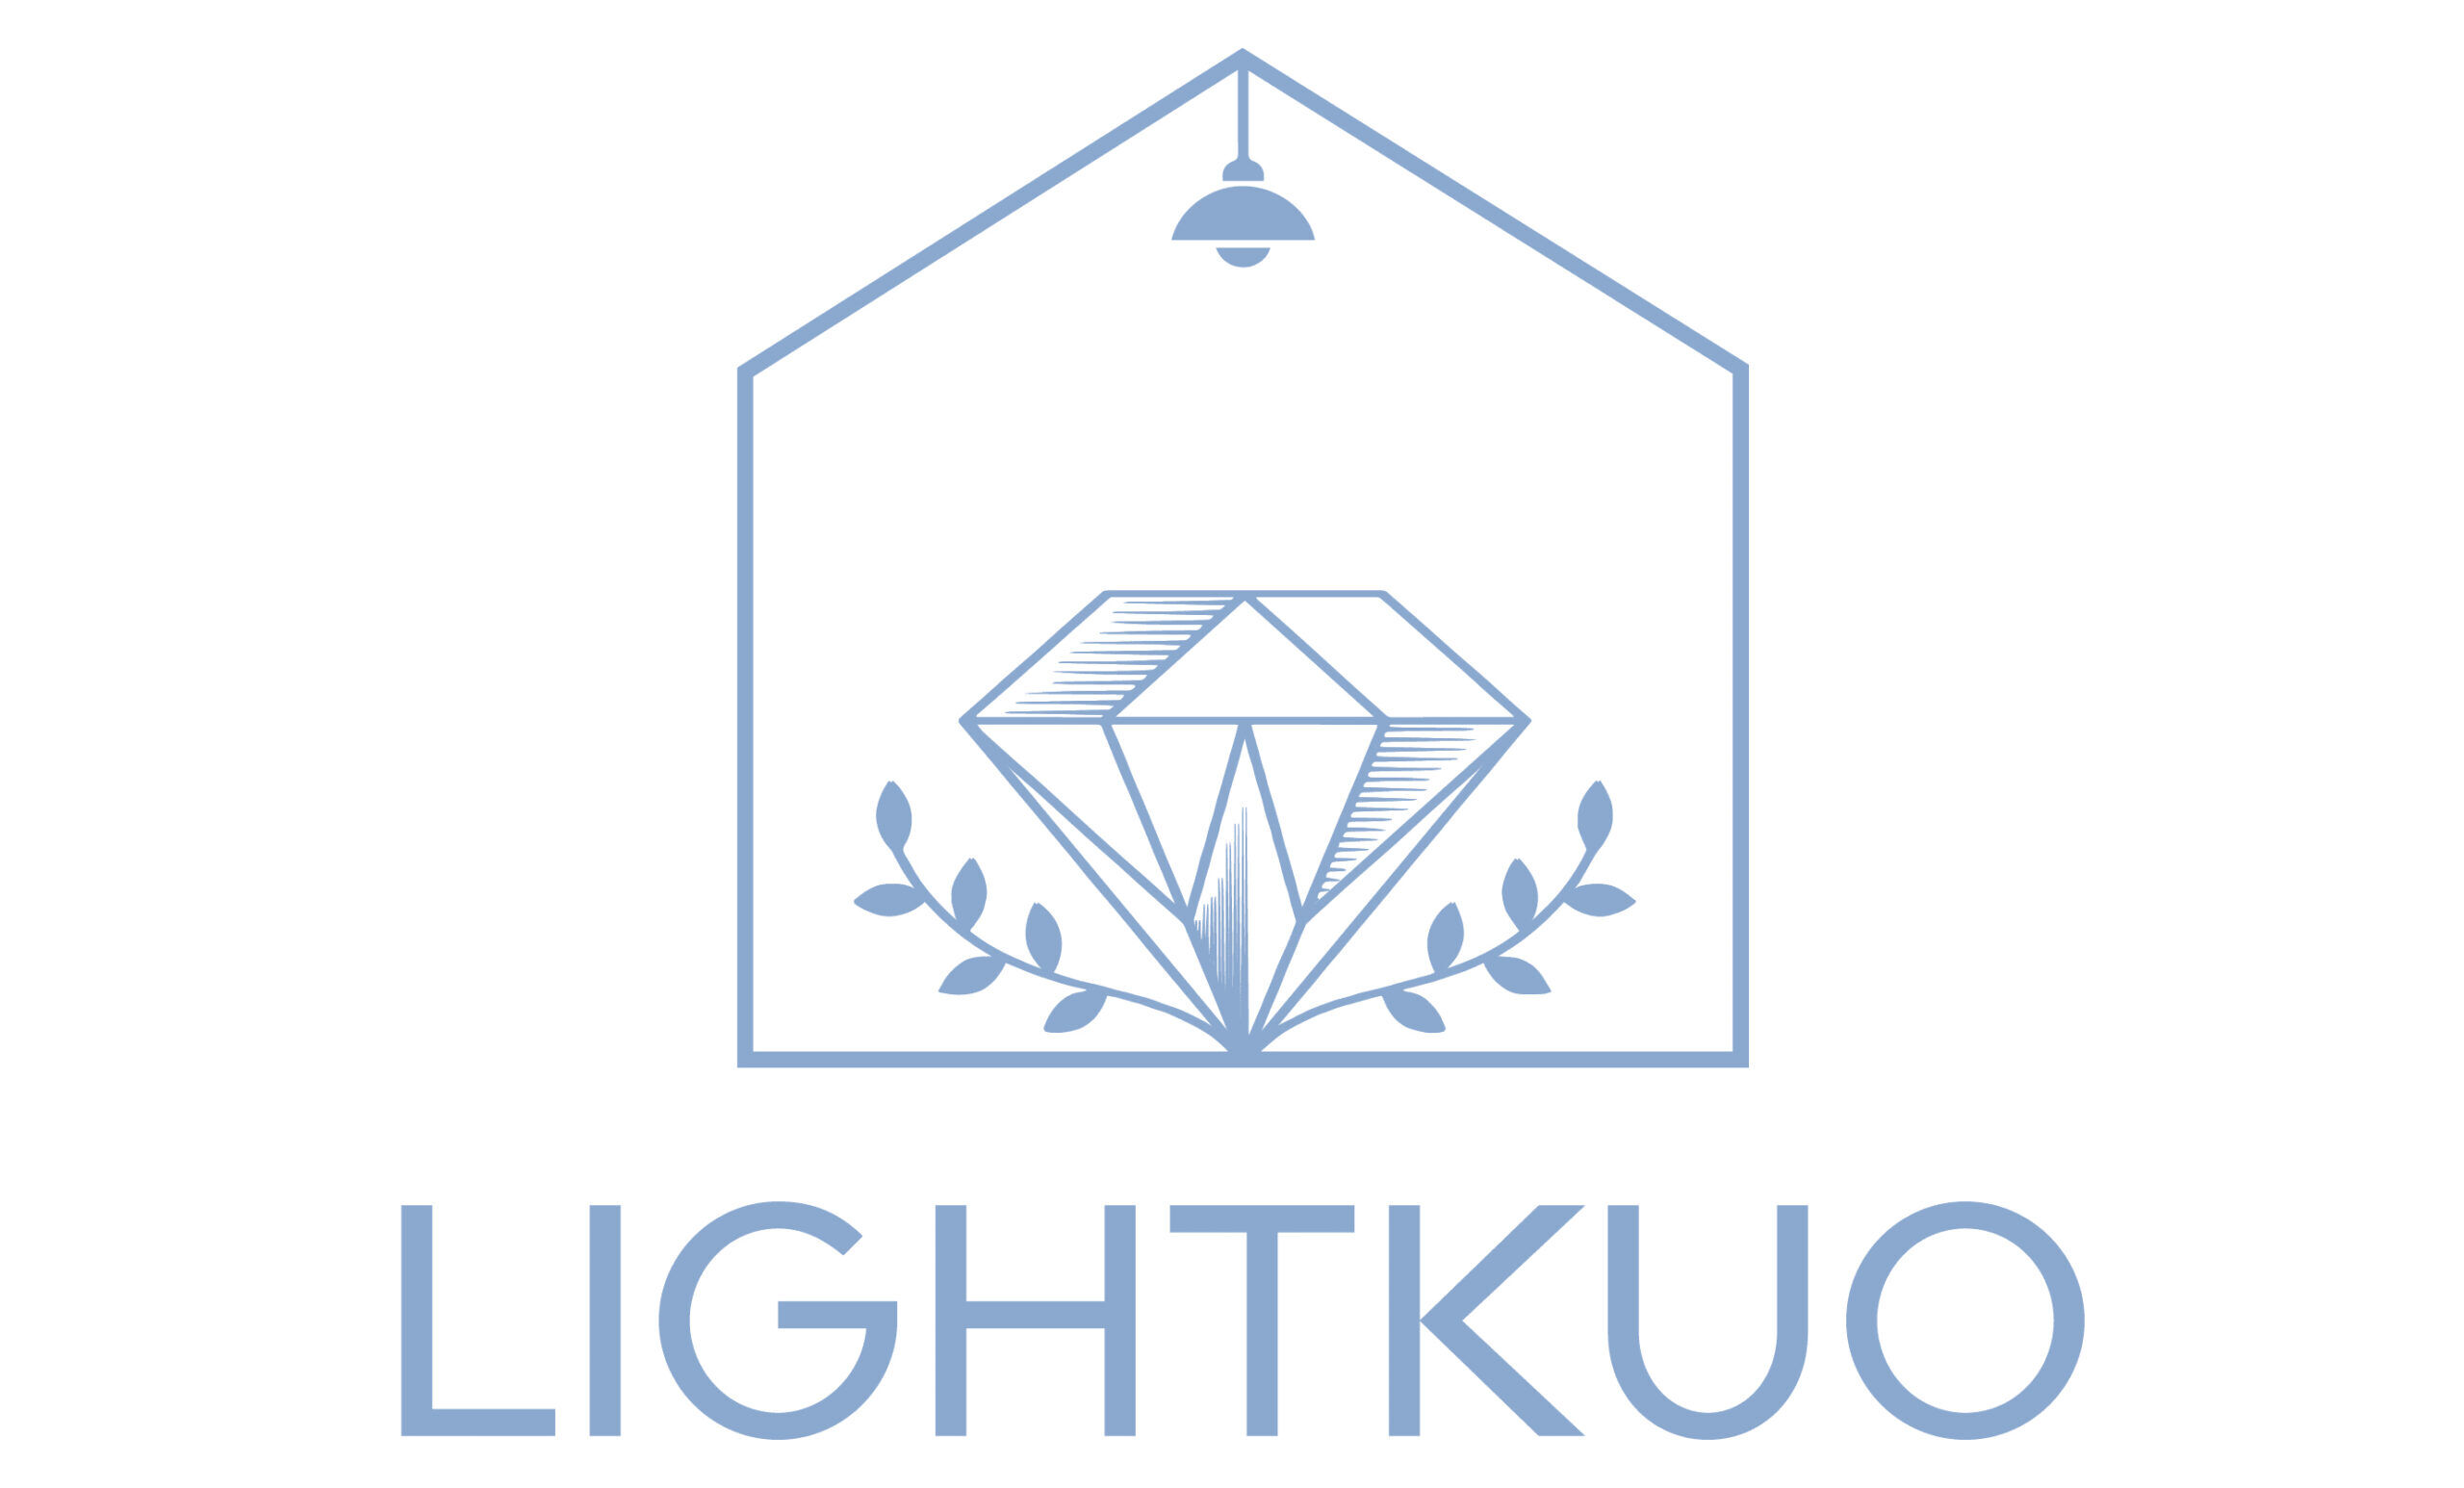 This is the lightkuo website logo